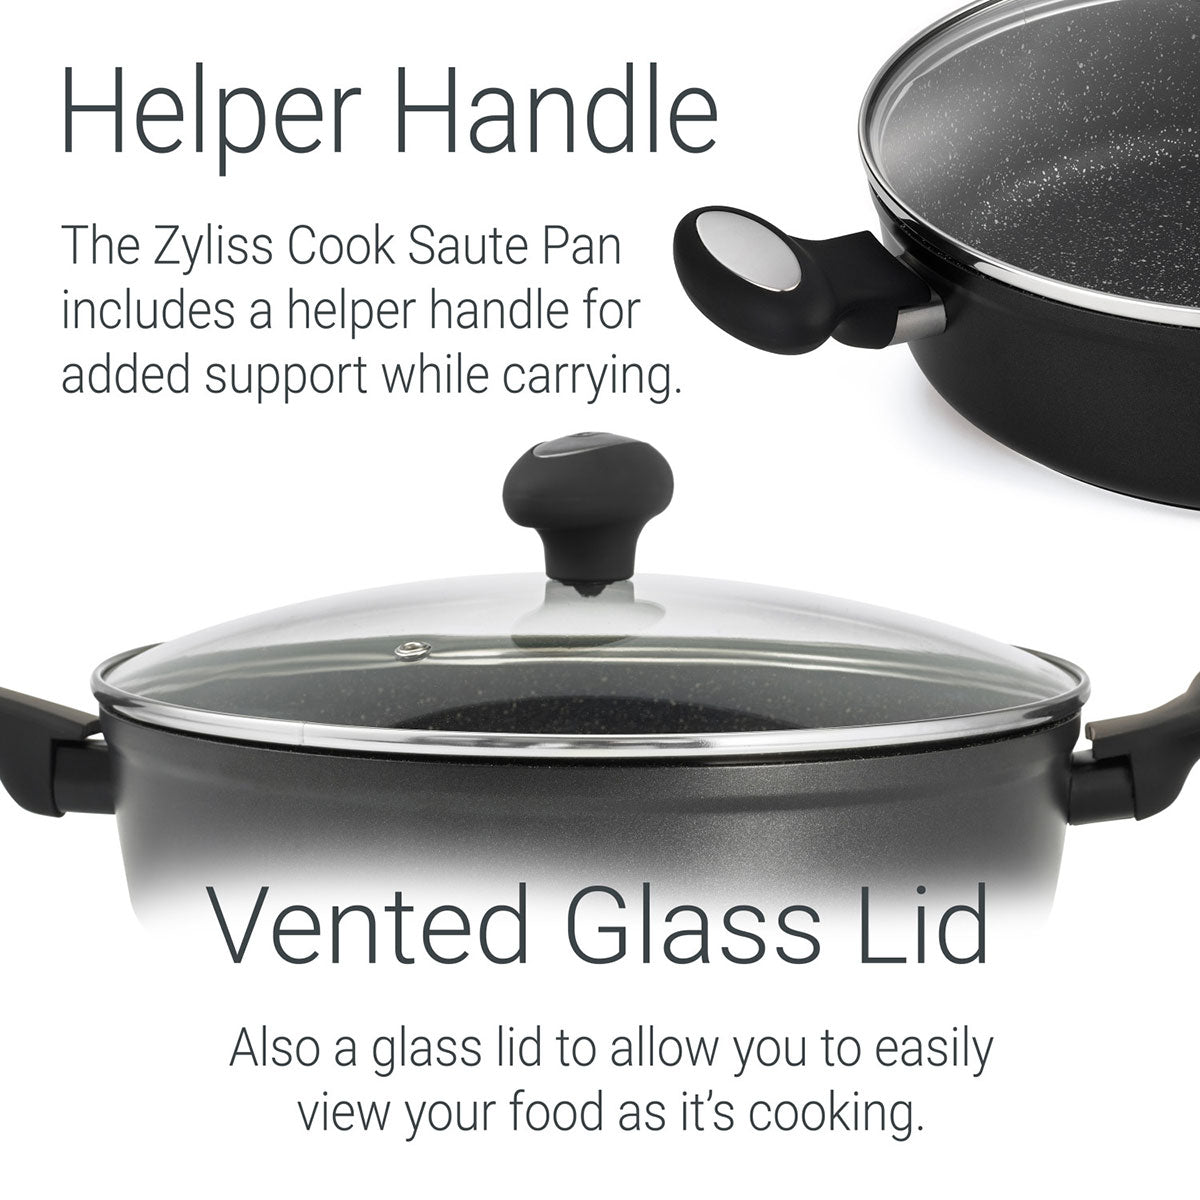 Zyliss Saute Pan -includes a helper handle for added support while carrying.  Vented Glass Lid-also a glass lid to allow you to easily view your food as its cooking.